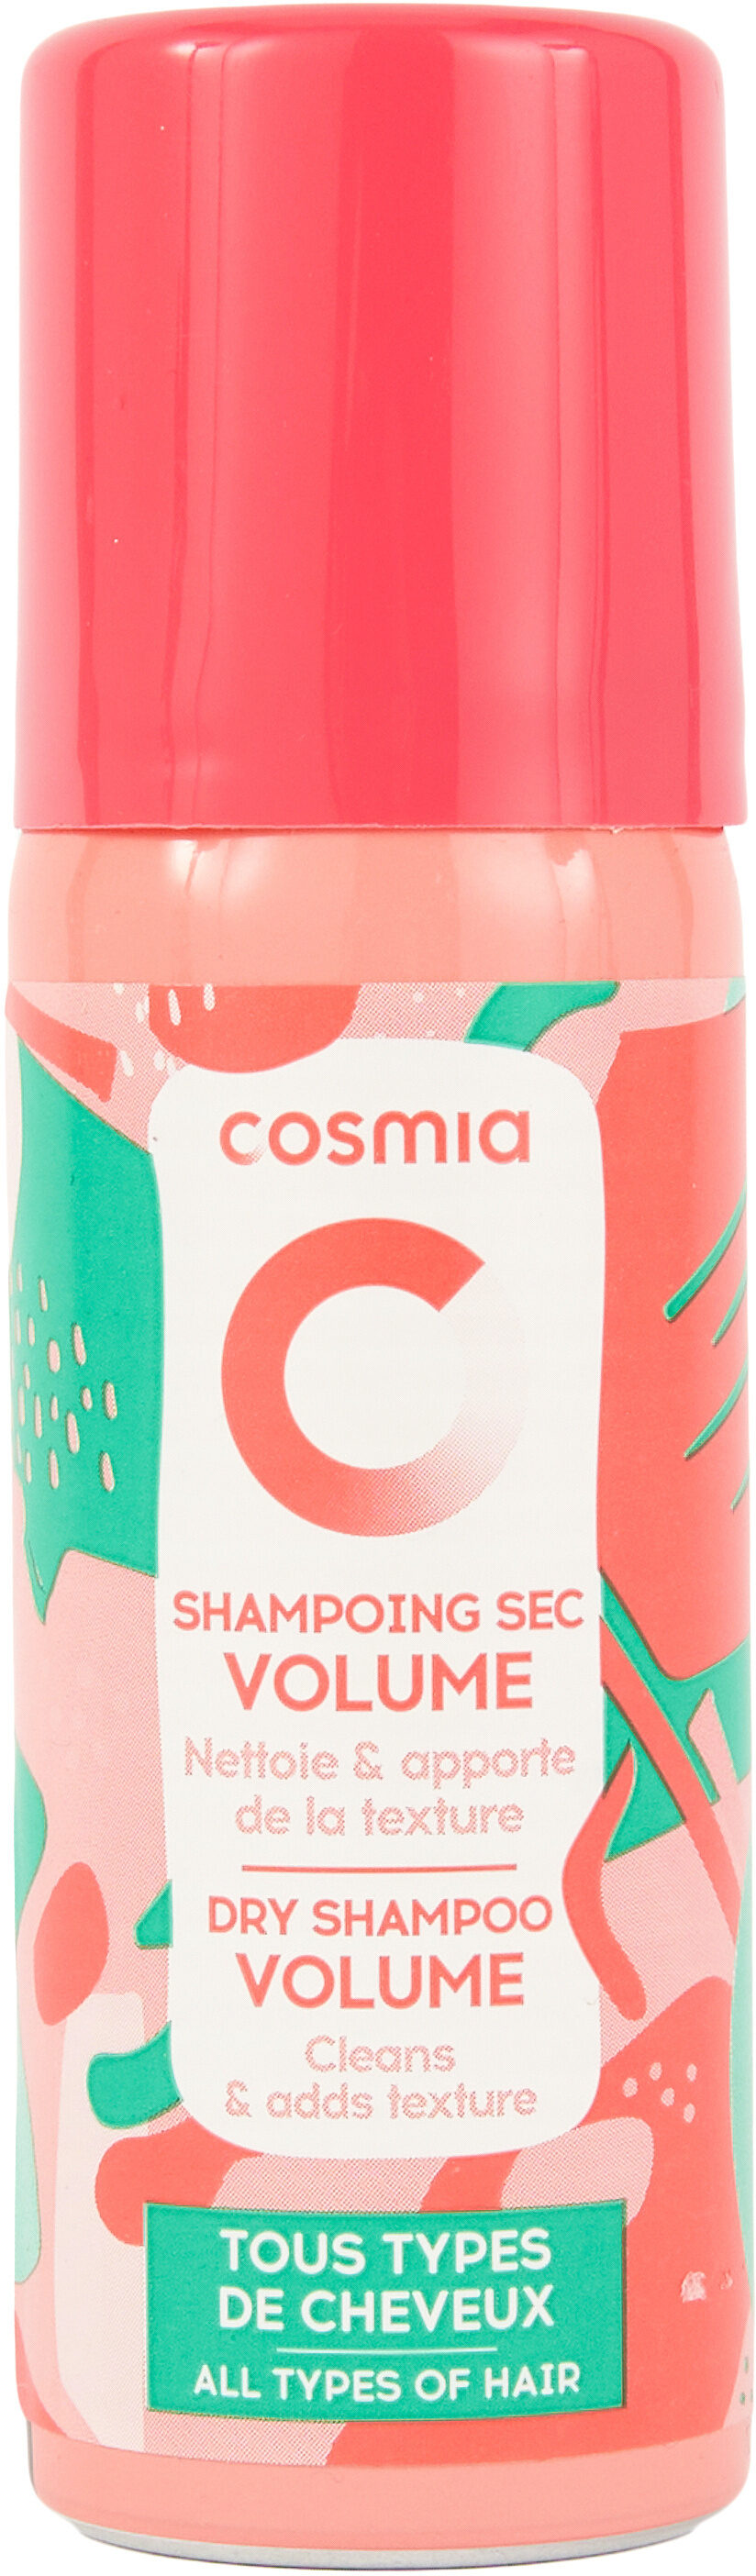 Shampoing sec - Product - fr